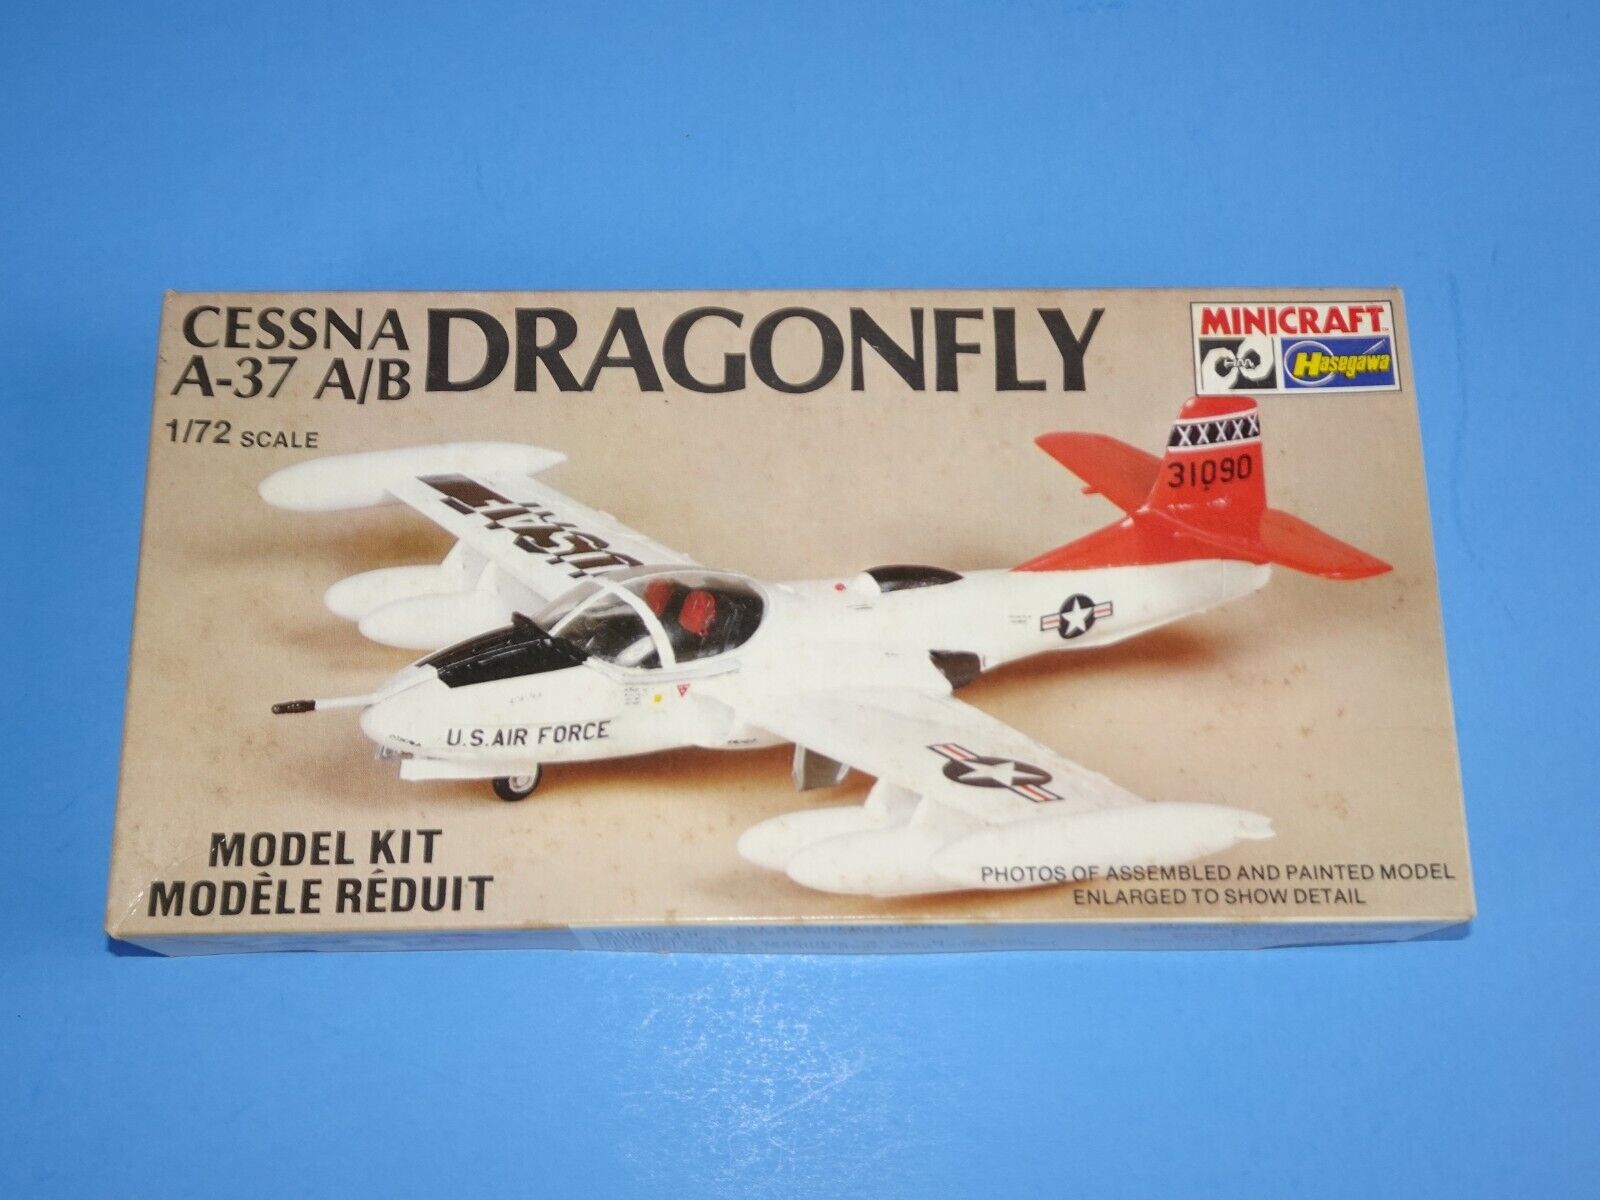 MINICRAFT #1036 CESSNA A-37 A/B DRAGONFLY 1/72 SCALE.